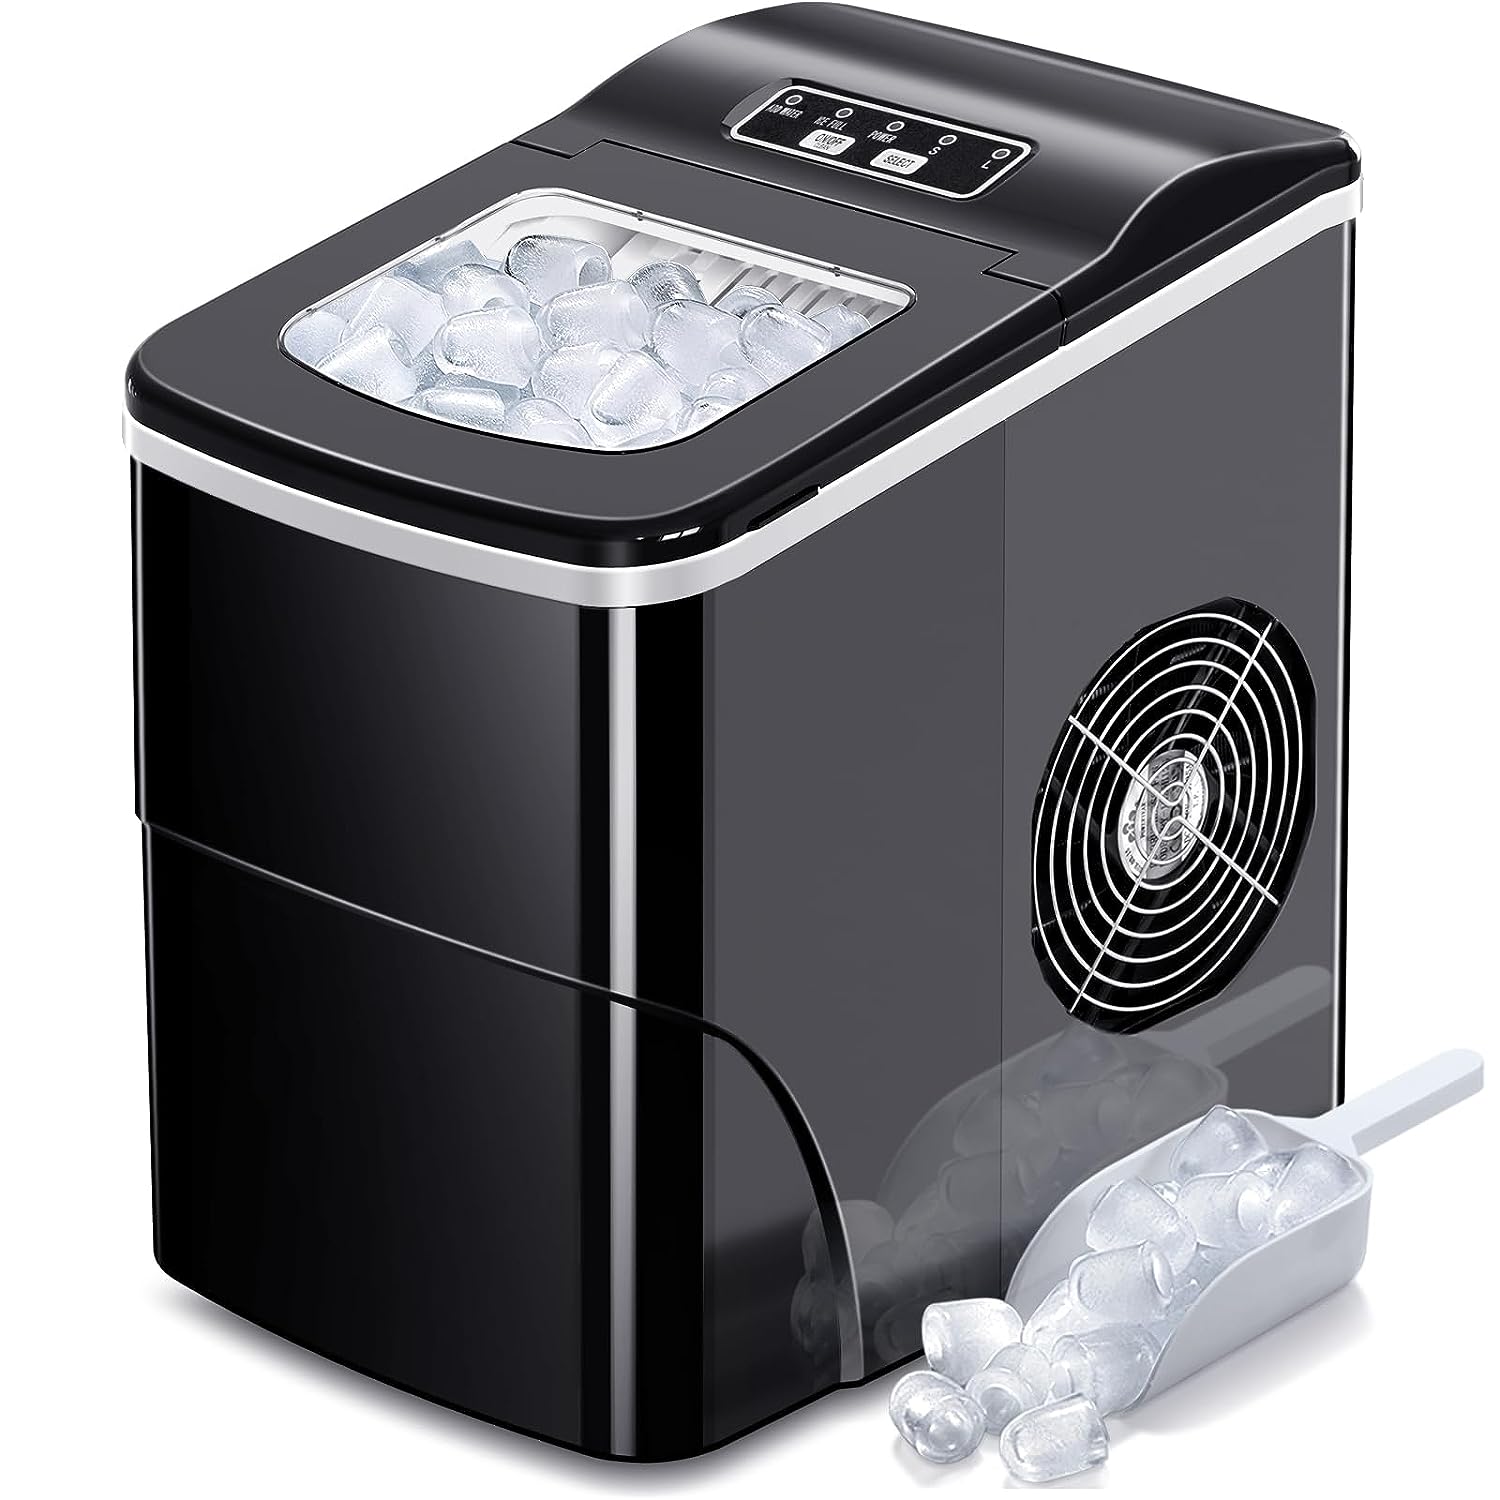 As a tenant of a cozy apartment, finding appliances that fit my limited space without sacrificing functionality is always a challenge. That' why I'm beyond thrilled with my AGLUCKY Ice Maker! This compact gem has been a game-changer. Here' how:Efficiency and Speed: The AGLUCKY Ice Maker lives up to its promise, churning out 9 bullet-shaped ice cubes in just 6 to 8 minutes. It' impressive how quickly I can get a batch ready for my morning smoothie or an impromptu get-together with friends.Capa